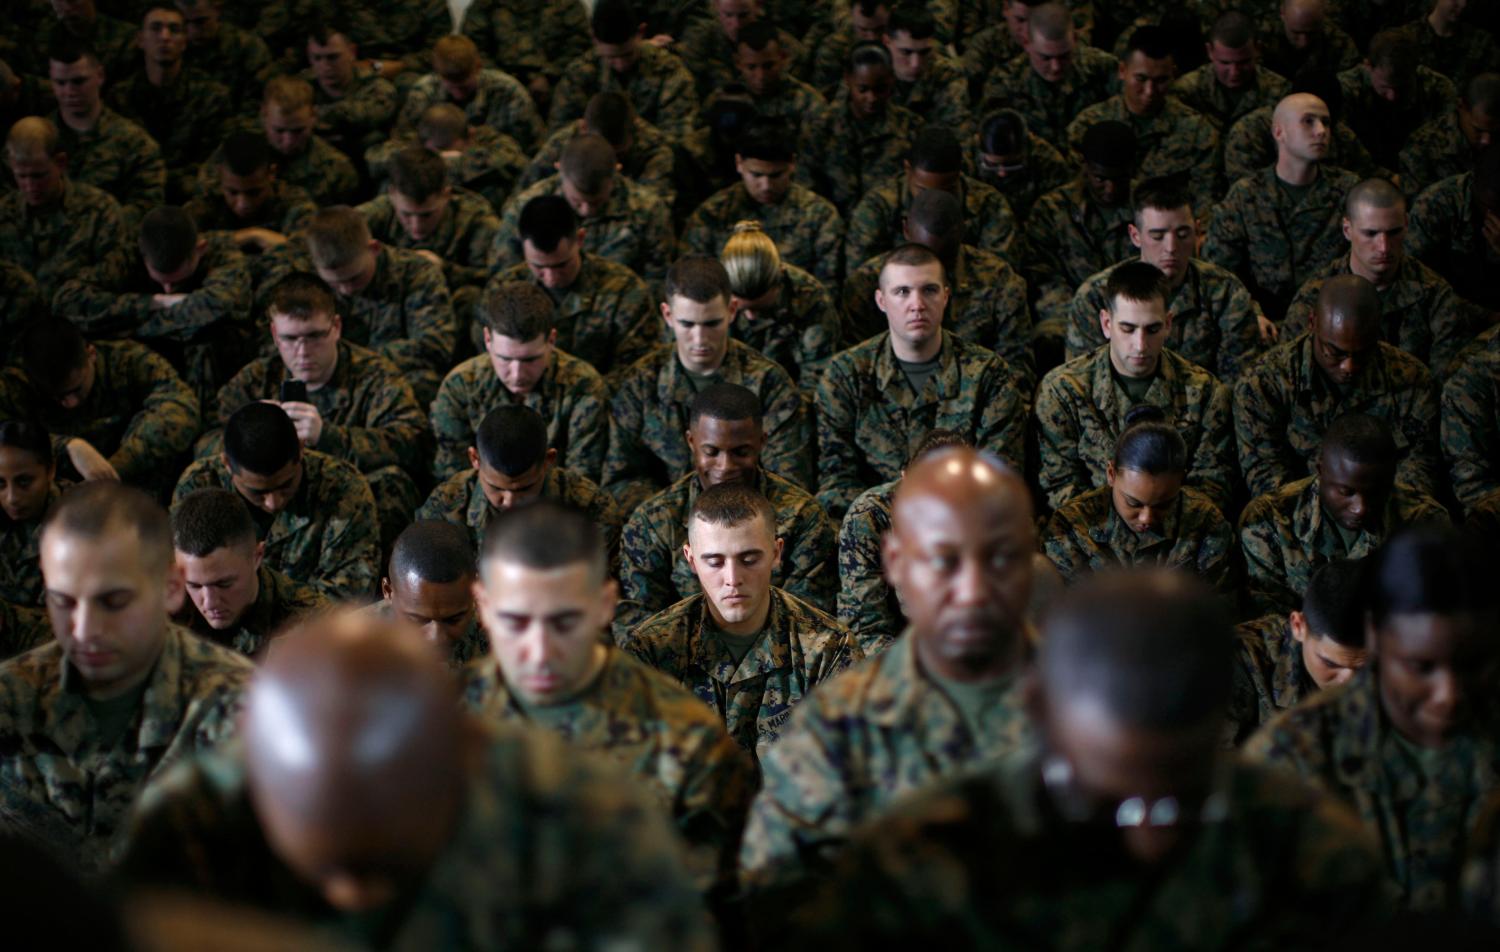 U.S. Marines bow their heads in prayer before the arrival of President Barack Obama at Camp Lejeune, North Carolina, February 27, 2009.    REUTERS/Jim Young    (UNITED STATES) - GM1E52S08XG01